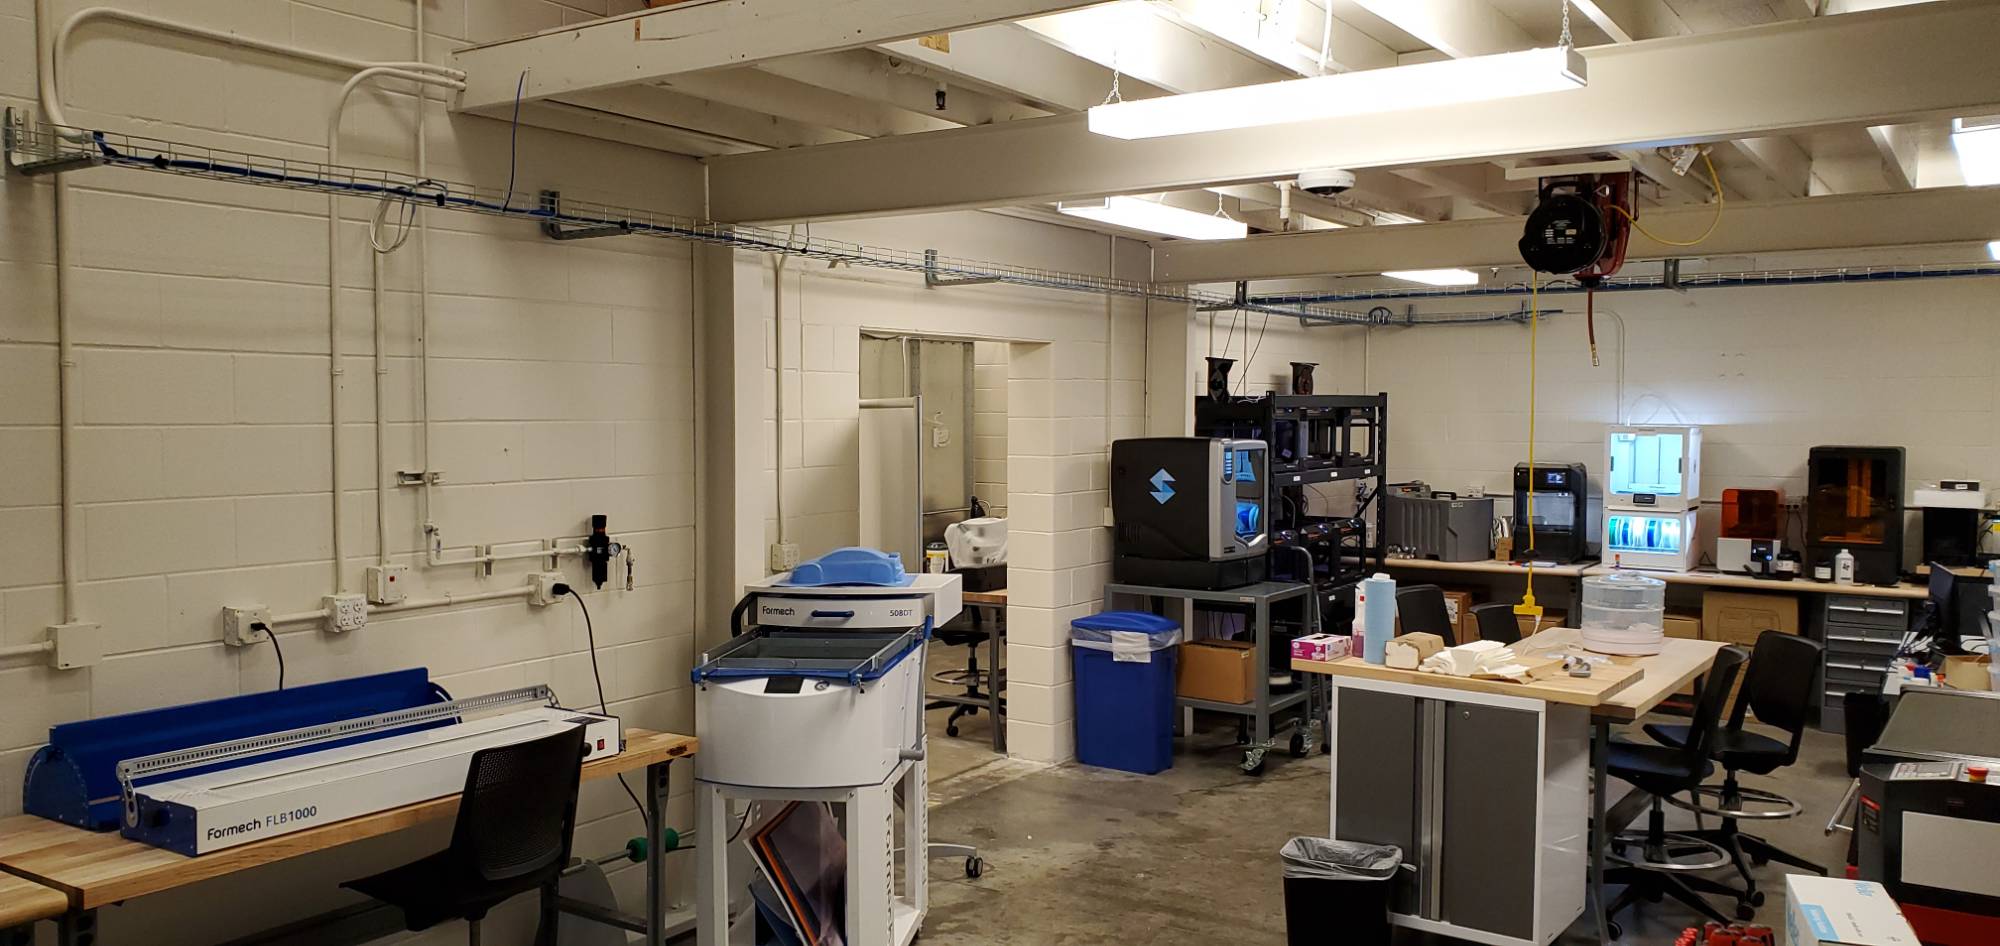 Rapid Prototyping Lab with equipment